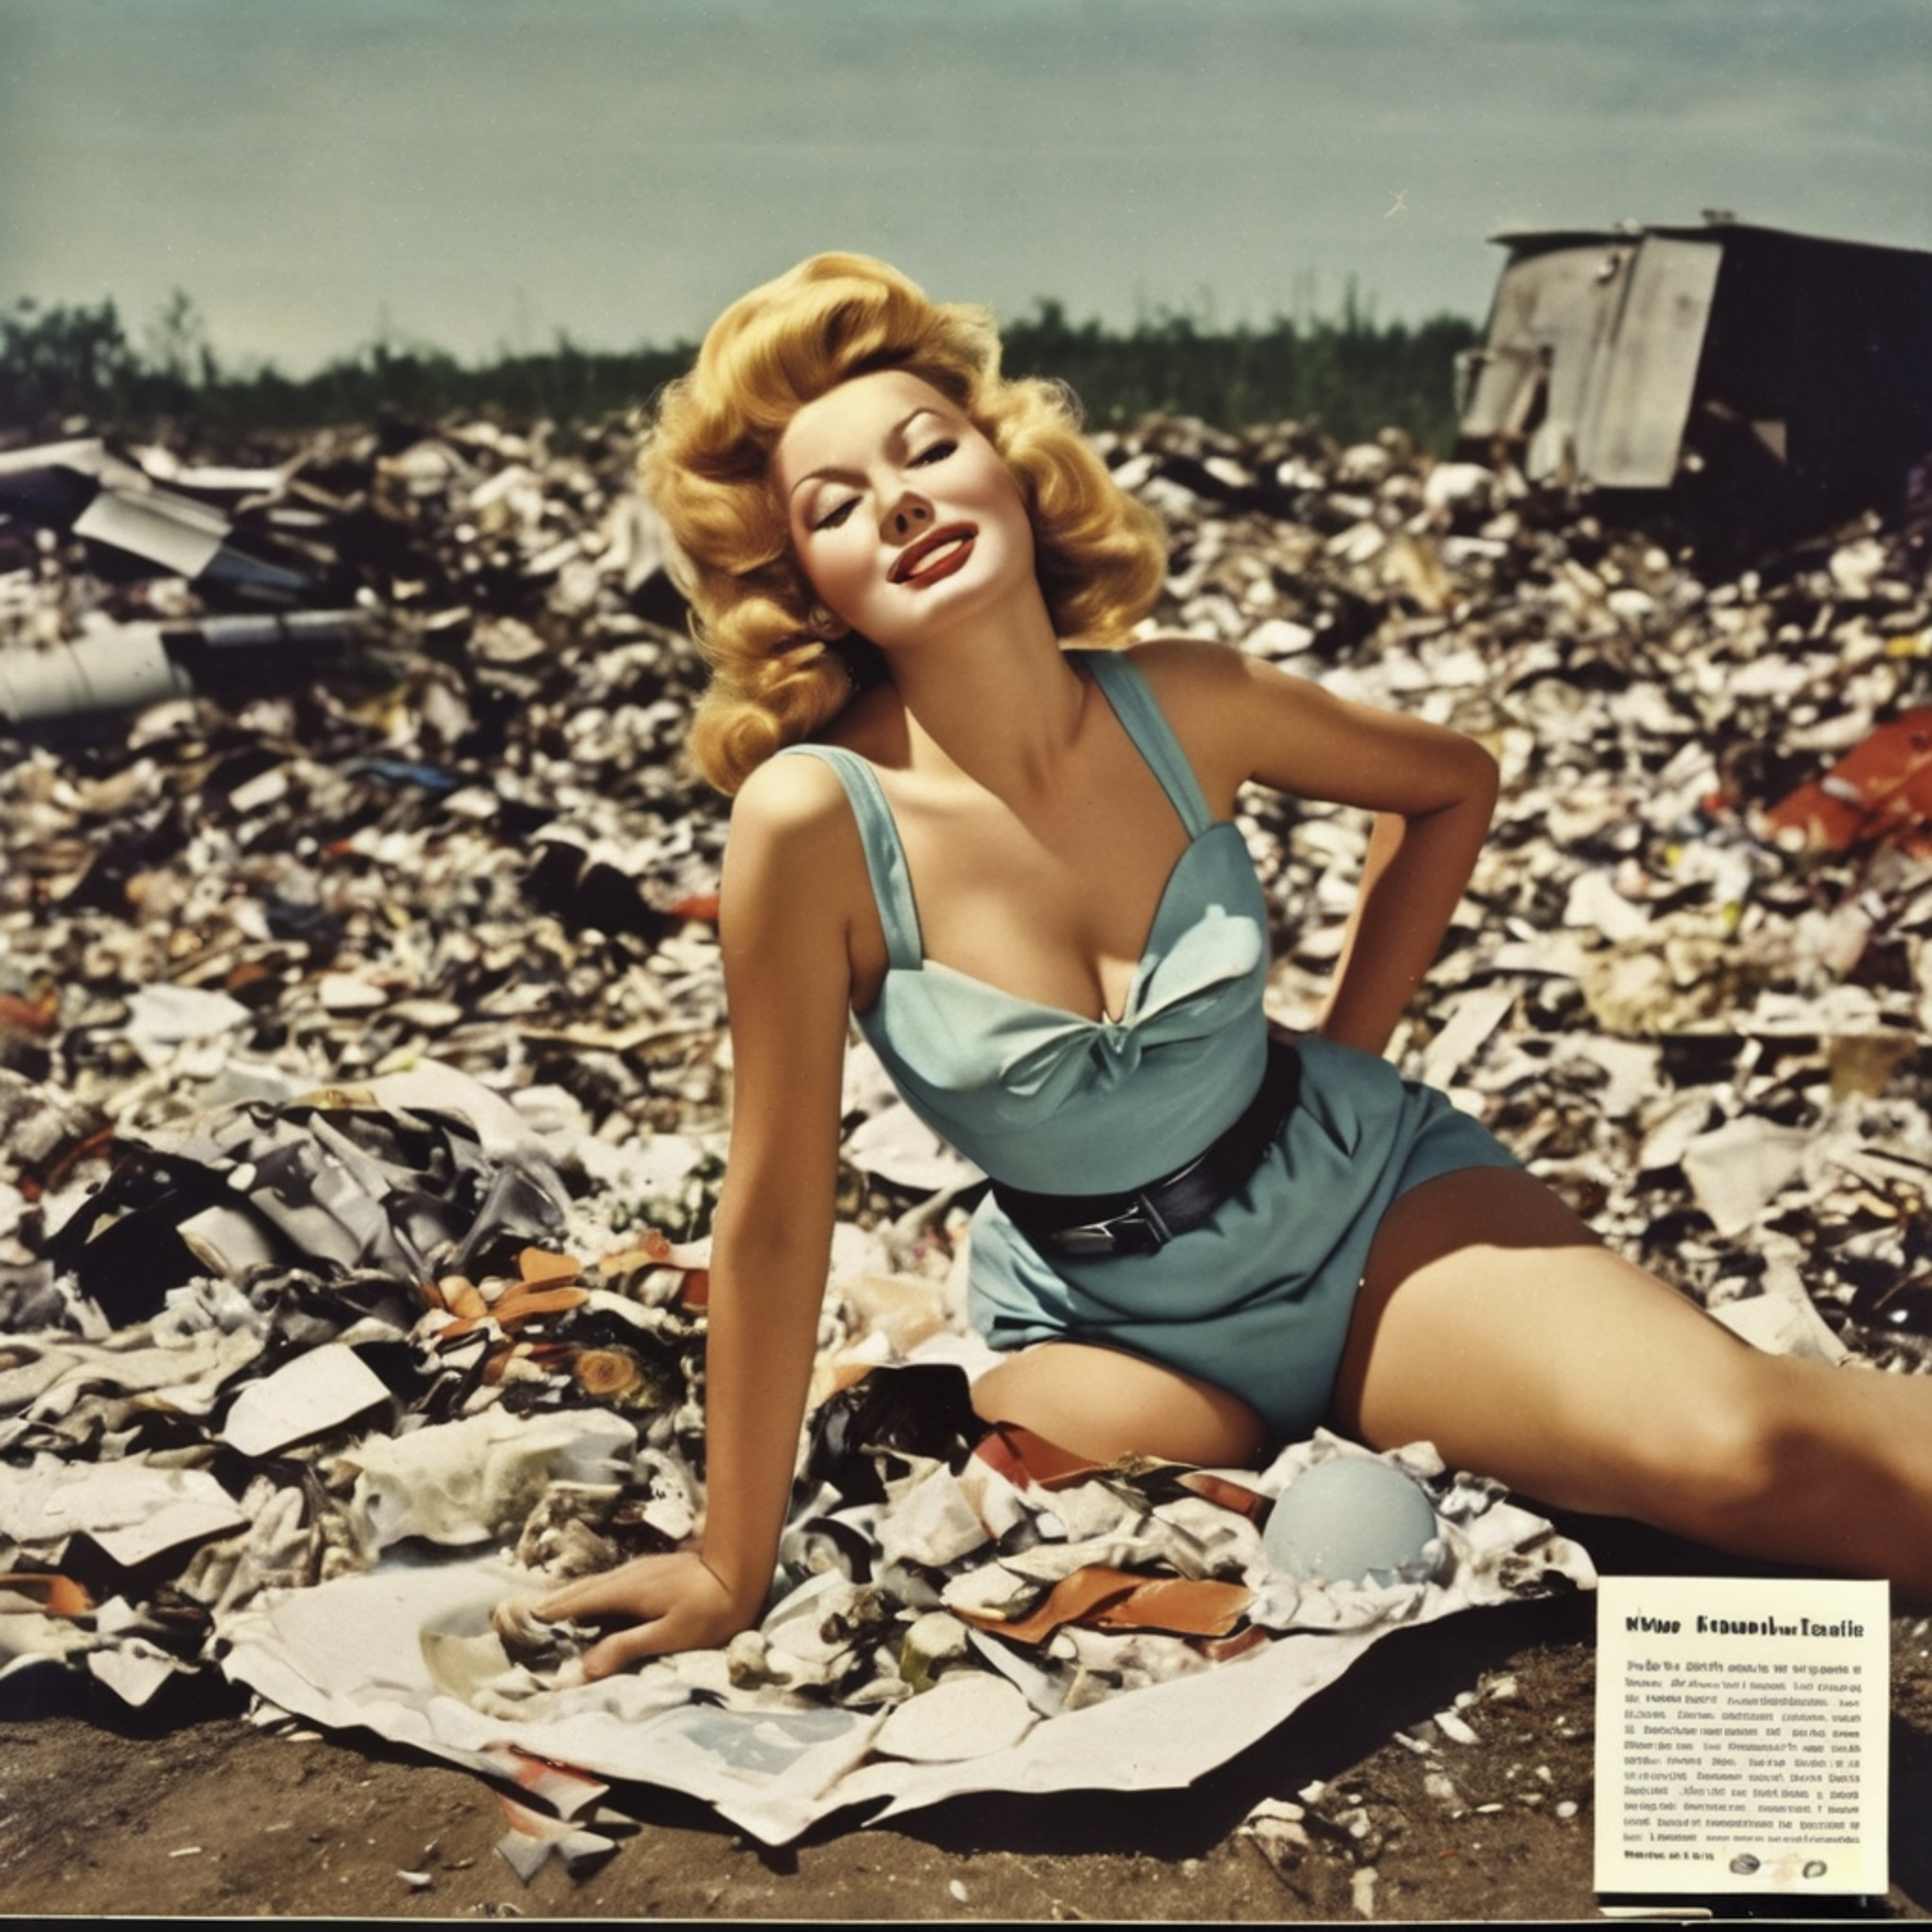 Landfill Lounging - Complicit Complacent-HEYDT-2024-AiAssemblage-40x40in-4 2.png